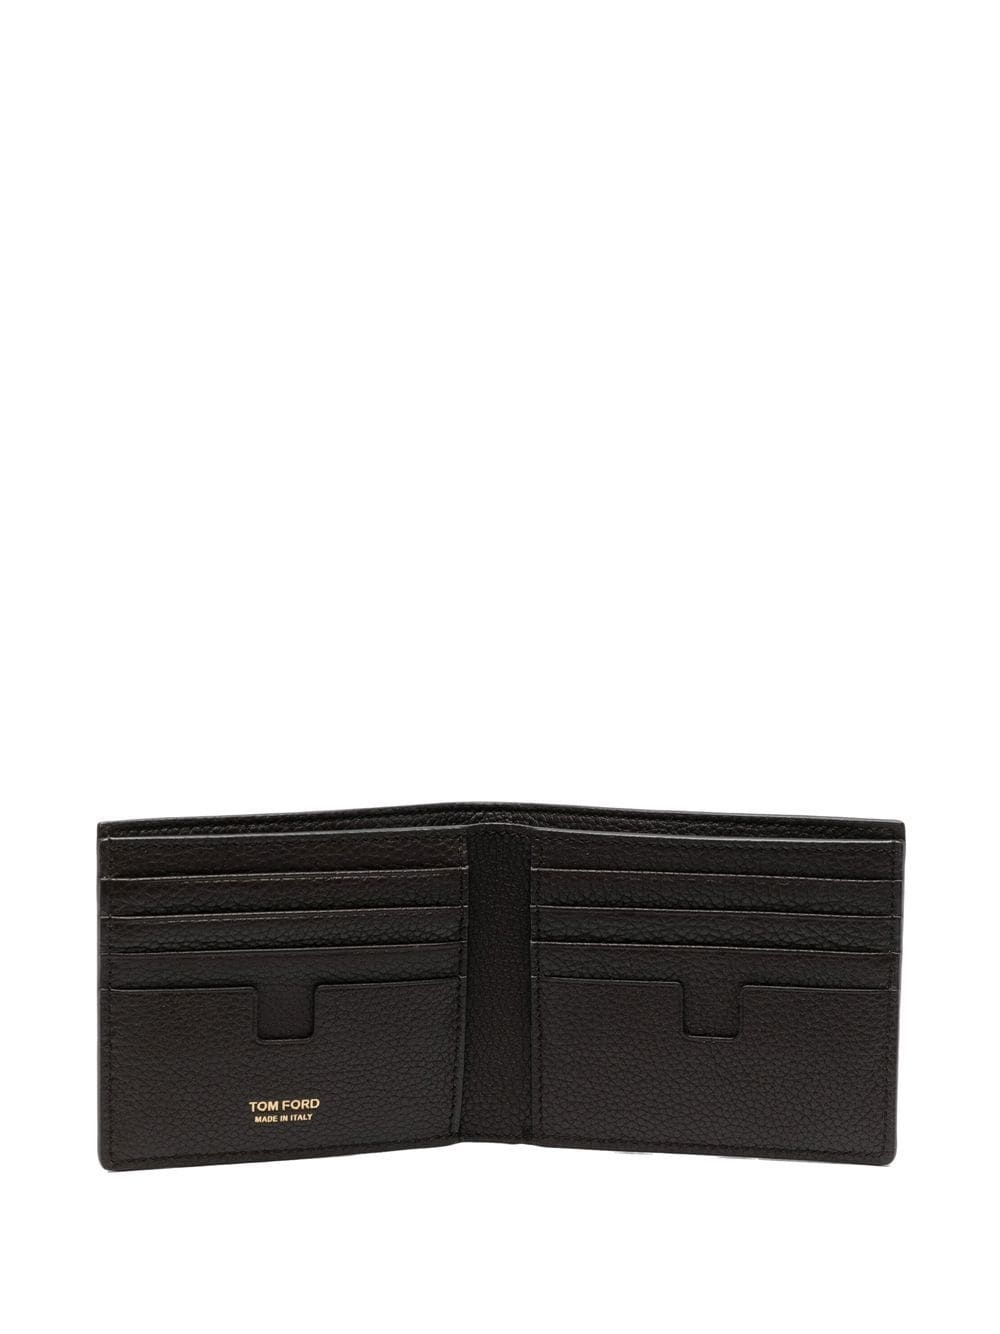 TOM FORD LEATHER WALLET - 6